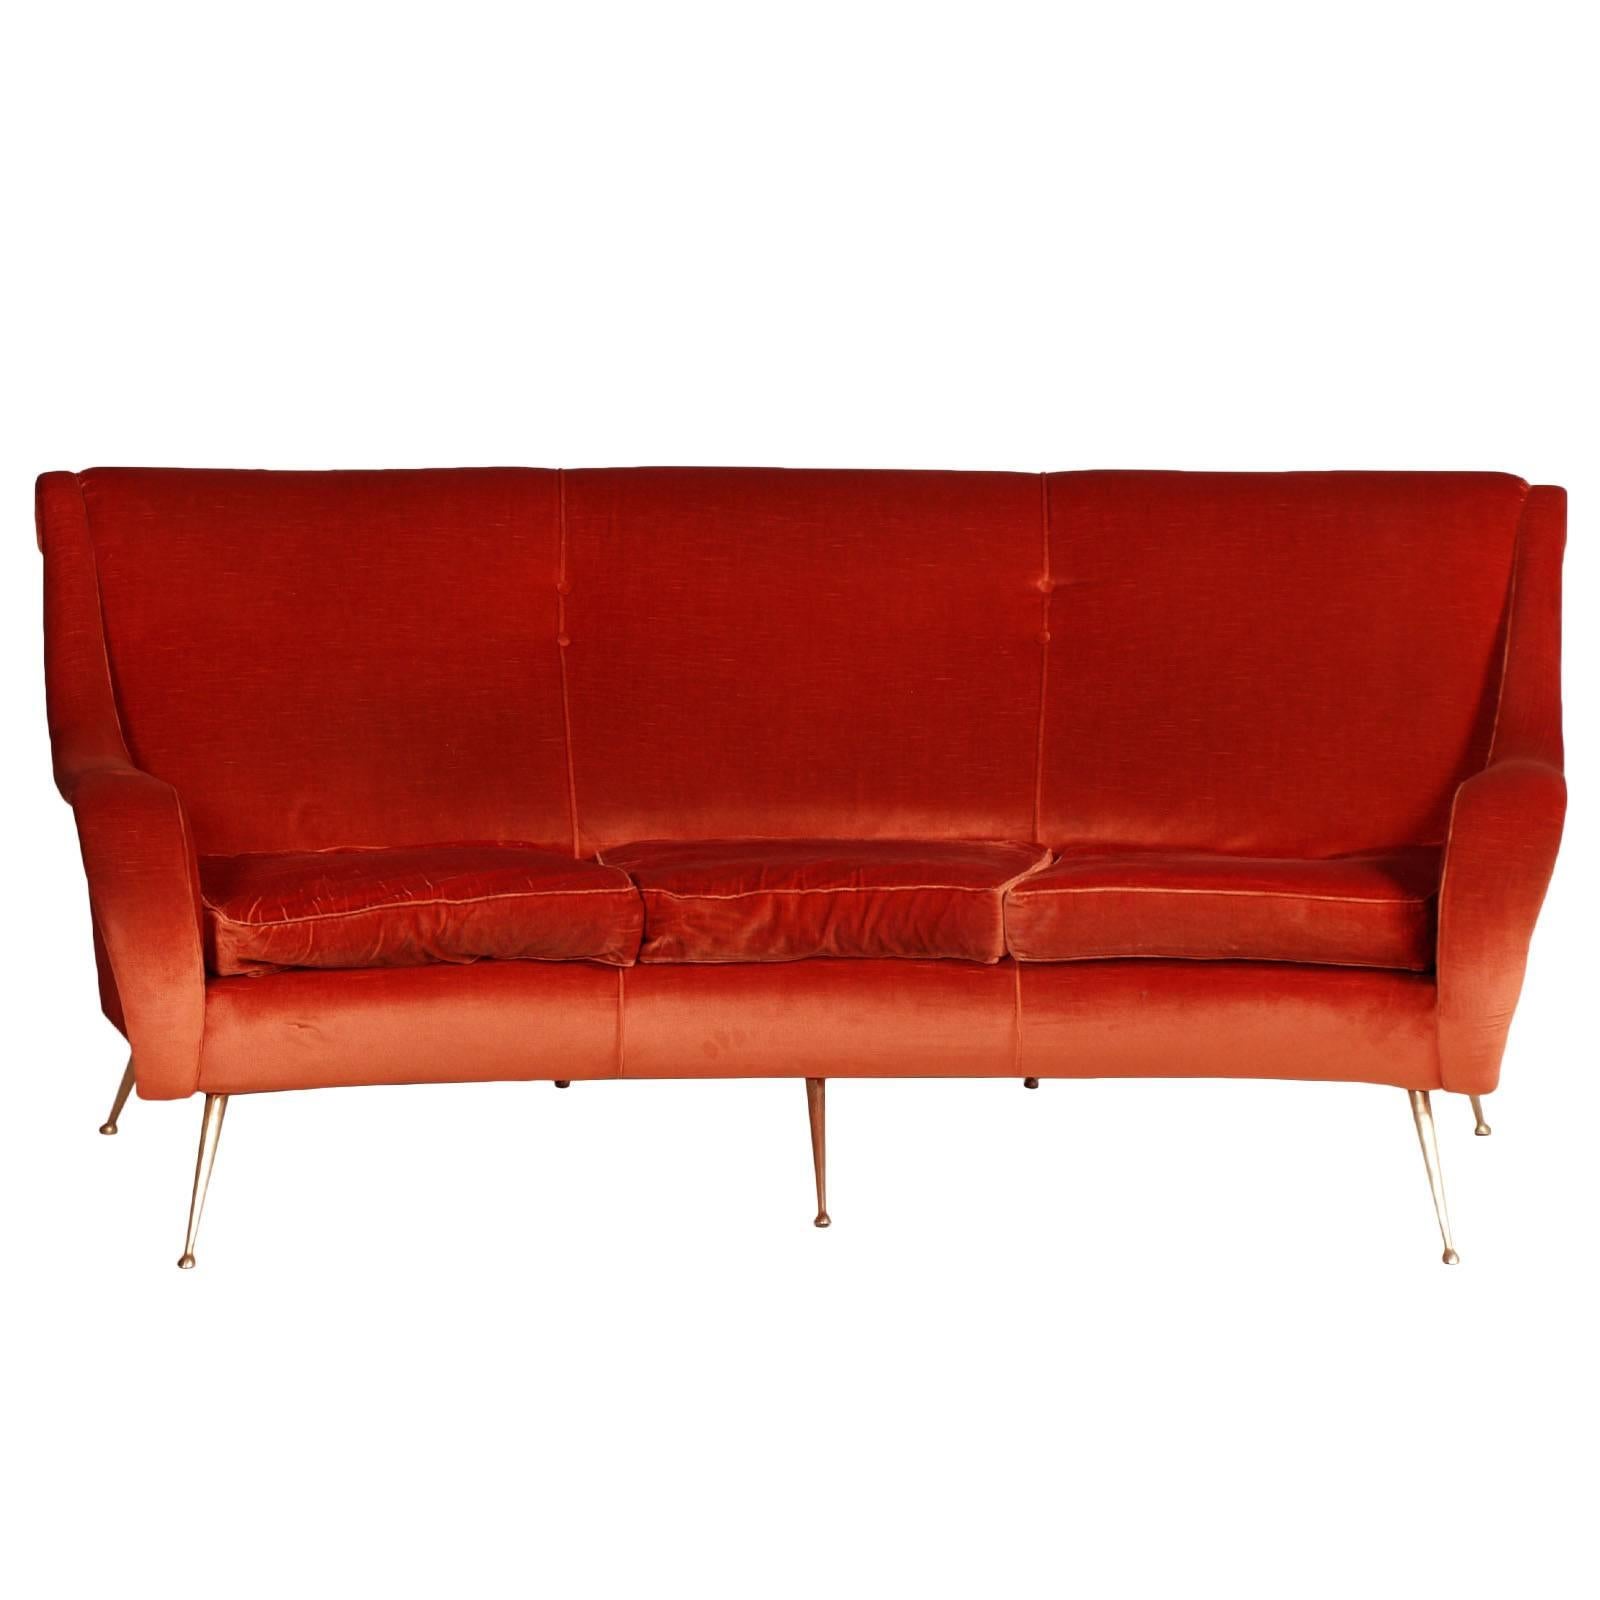 Elegant Italian Three-seat curved sofa Marco Zanuso design, golden legs, original red coral velvet and foam in very good condition, still usable. The velvet has been sanitized and has no obvious signs of wear.
With 1500 euros, on request we can